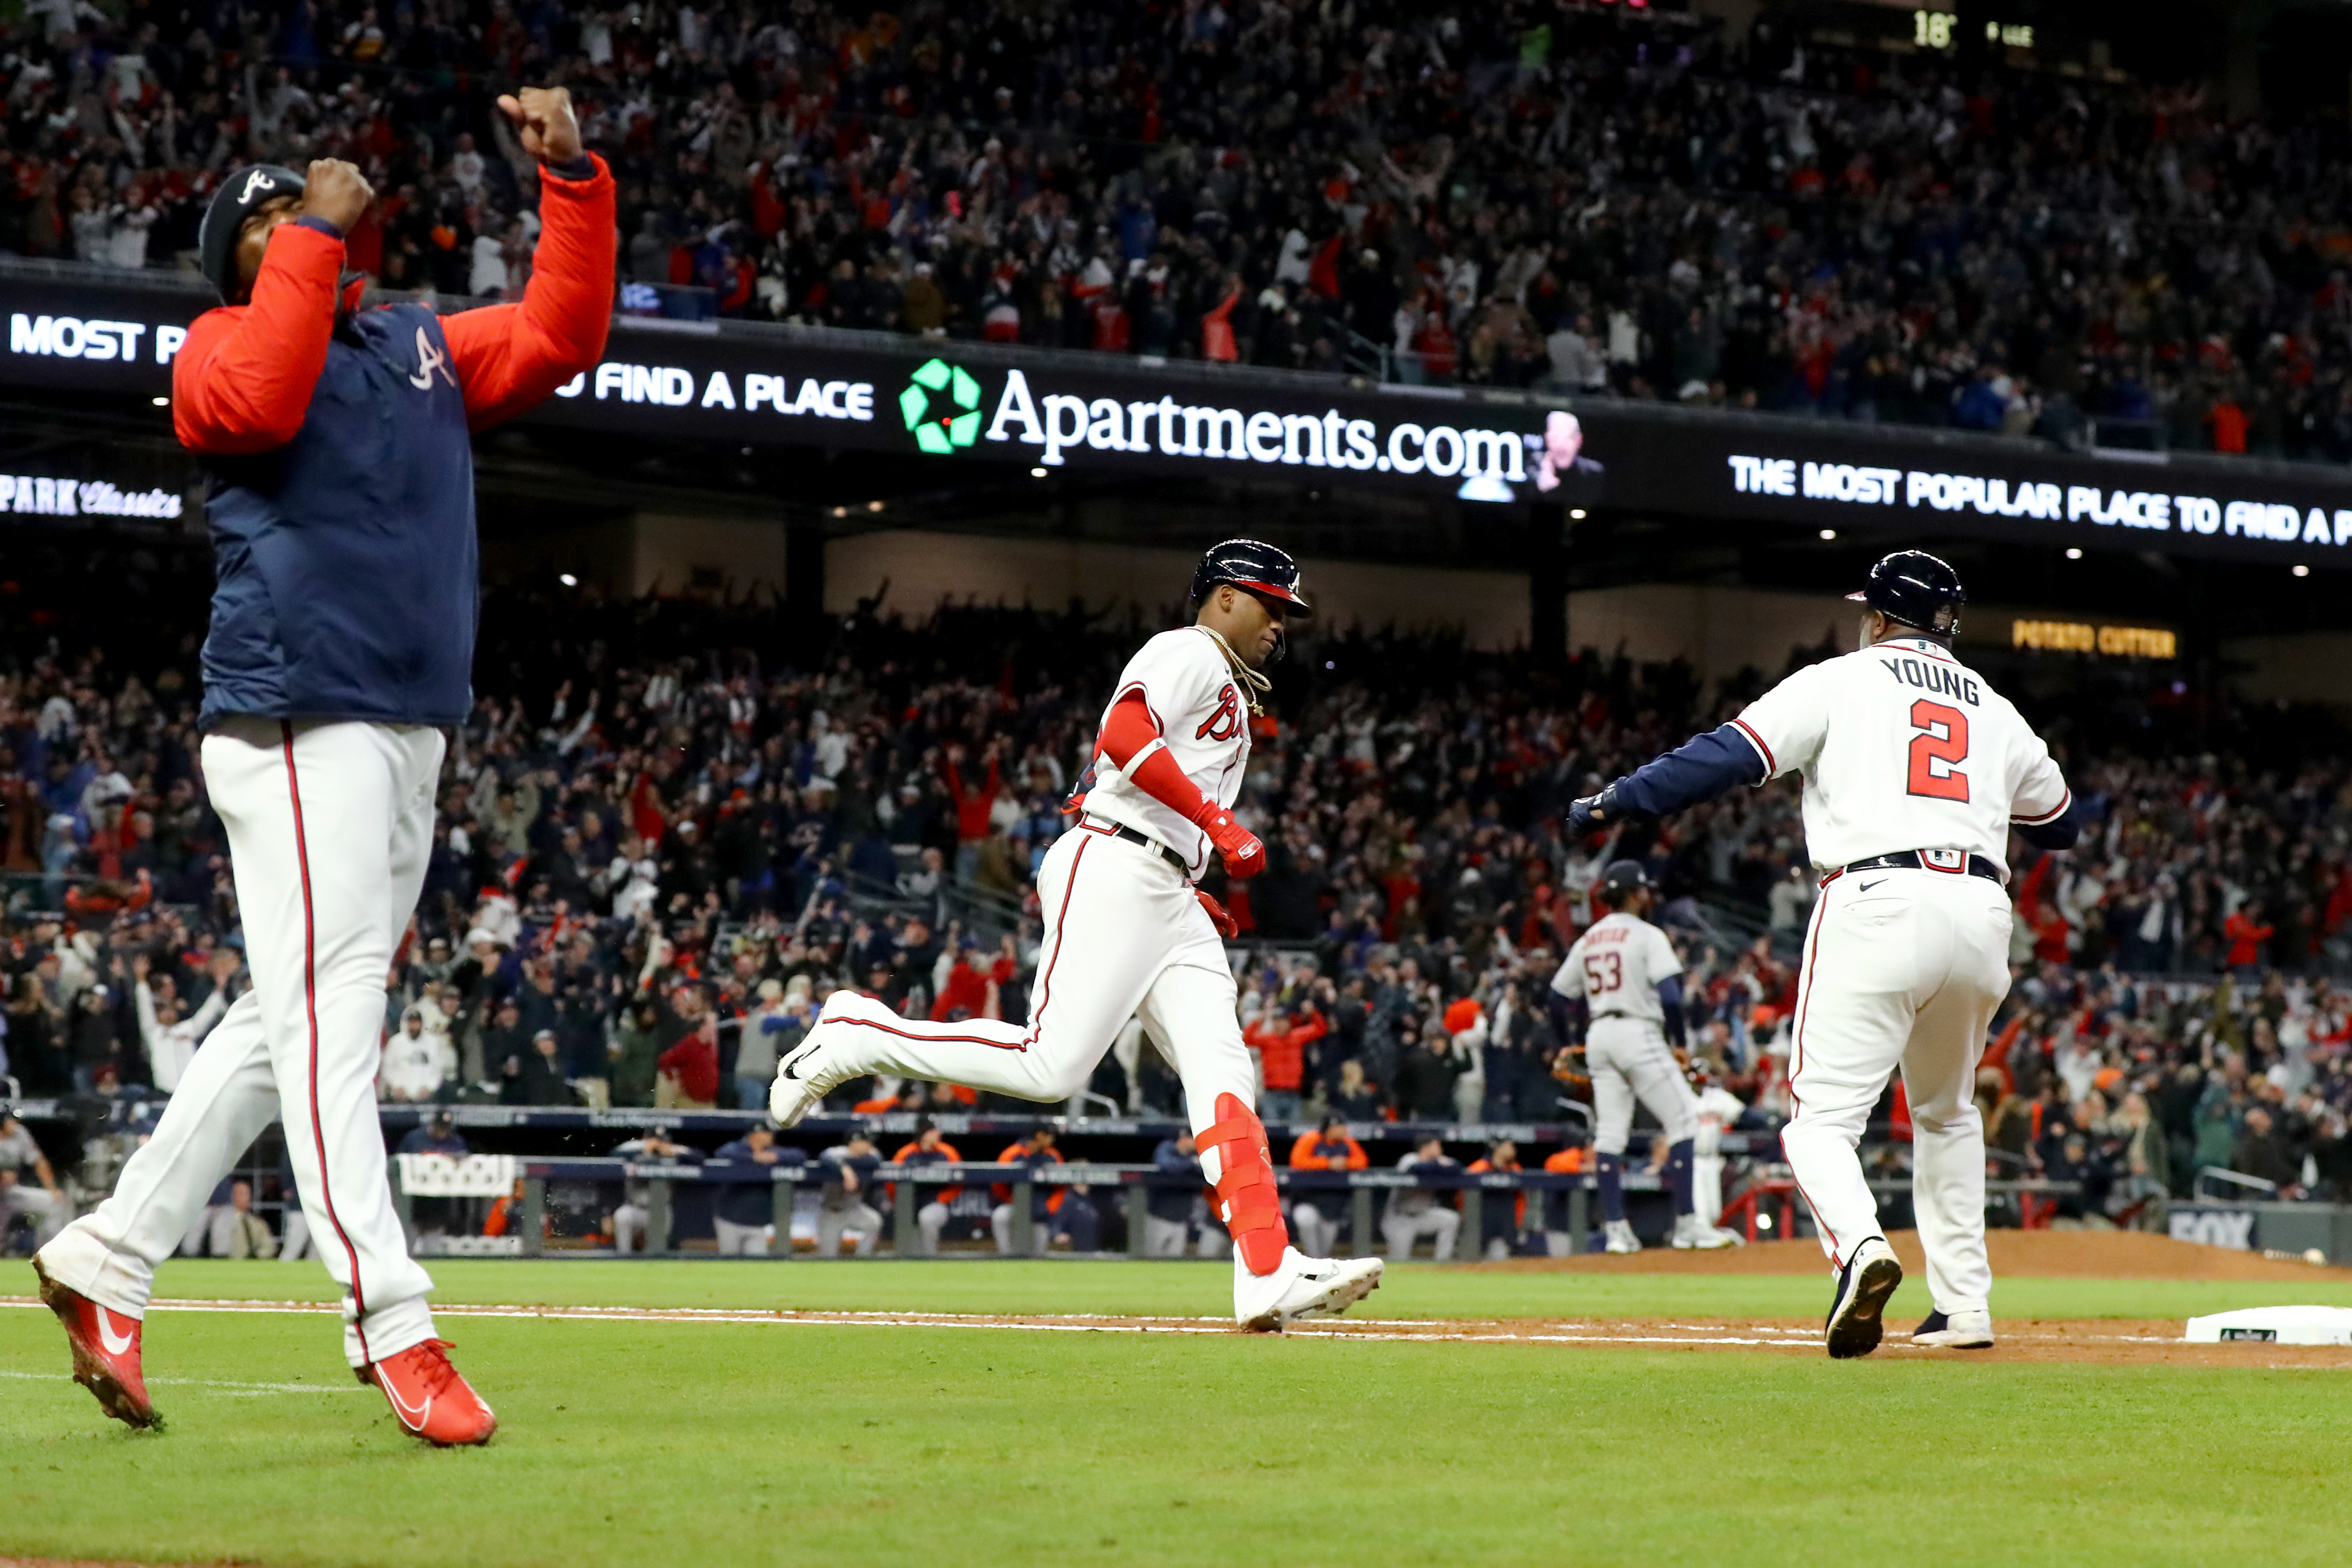 Braves rally for Game 4 win over Astros, take 3-1 lead in World Series 